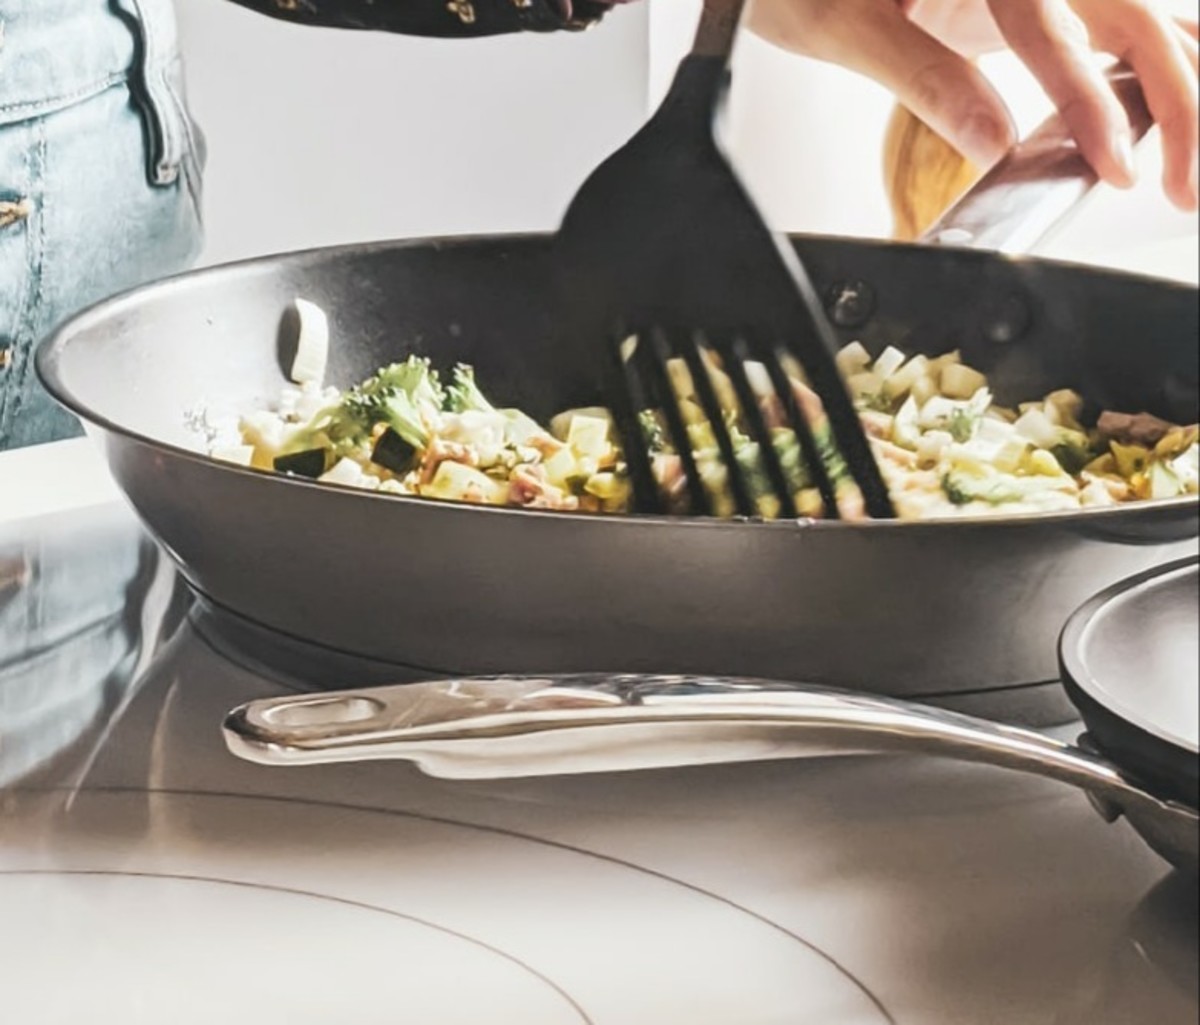 Read on for some reviews of nonstick skillets and woks!